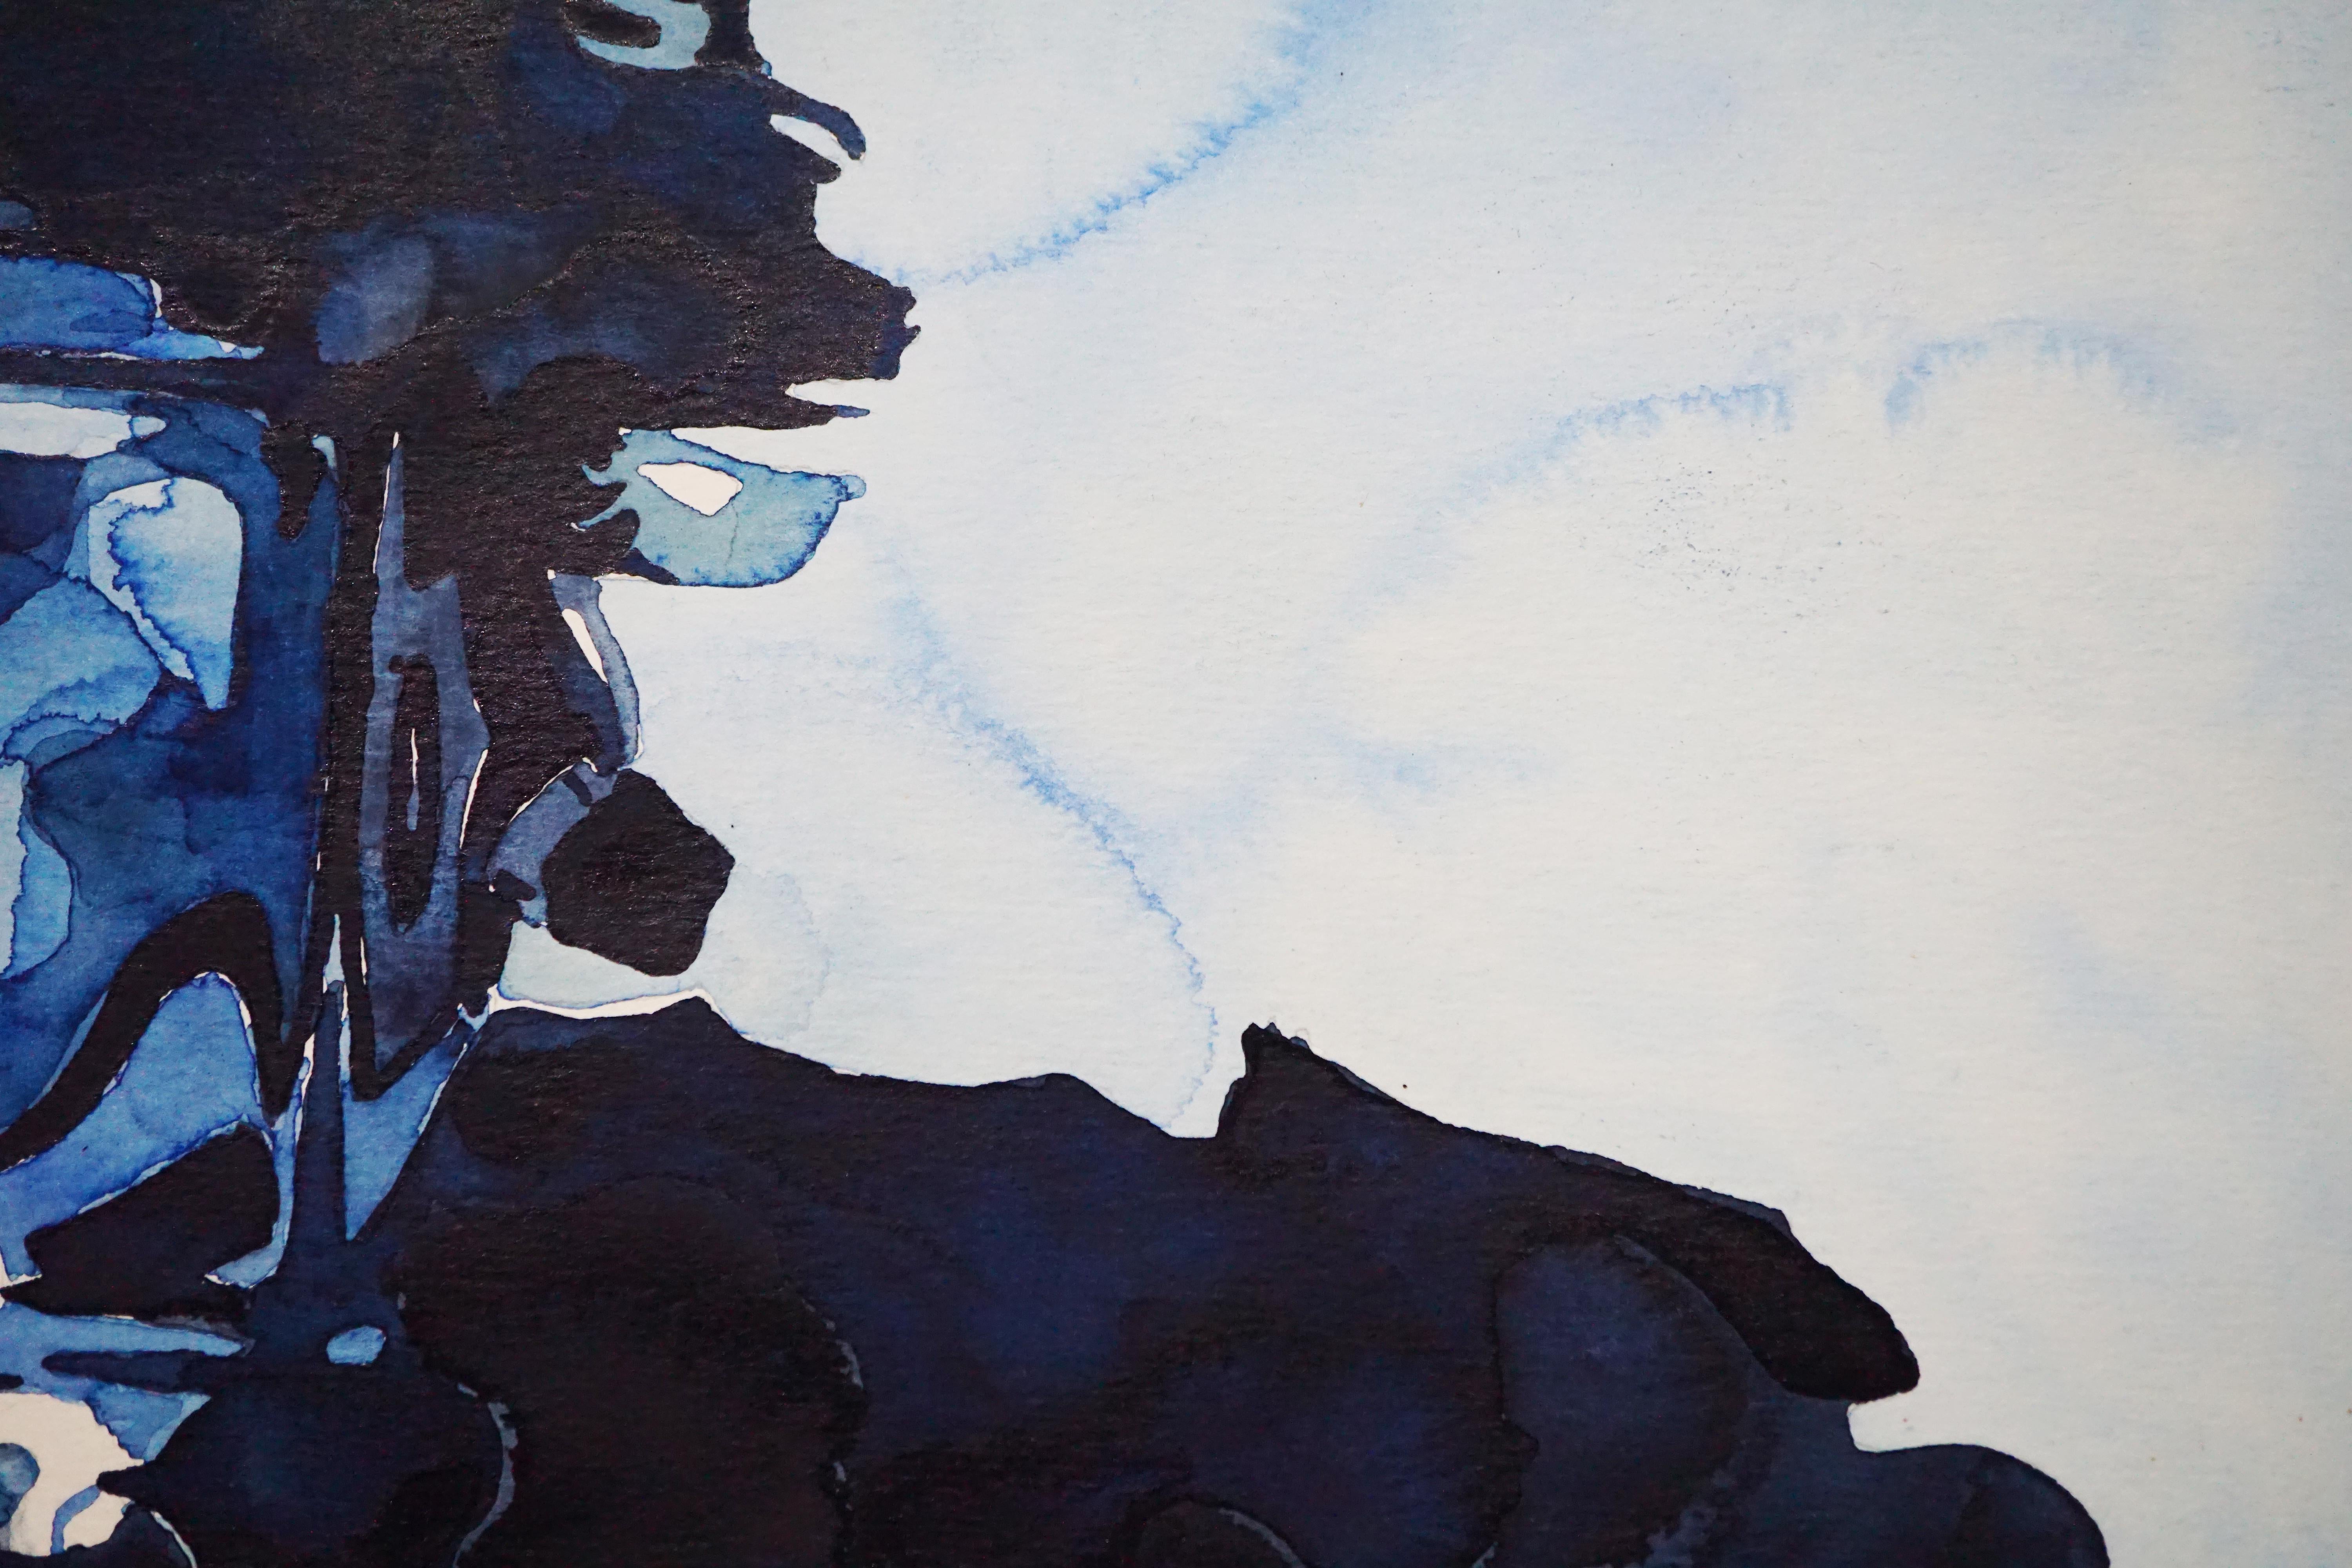 Faded in Blue #3 - Black Figurative Painting by Andi Waskito